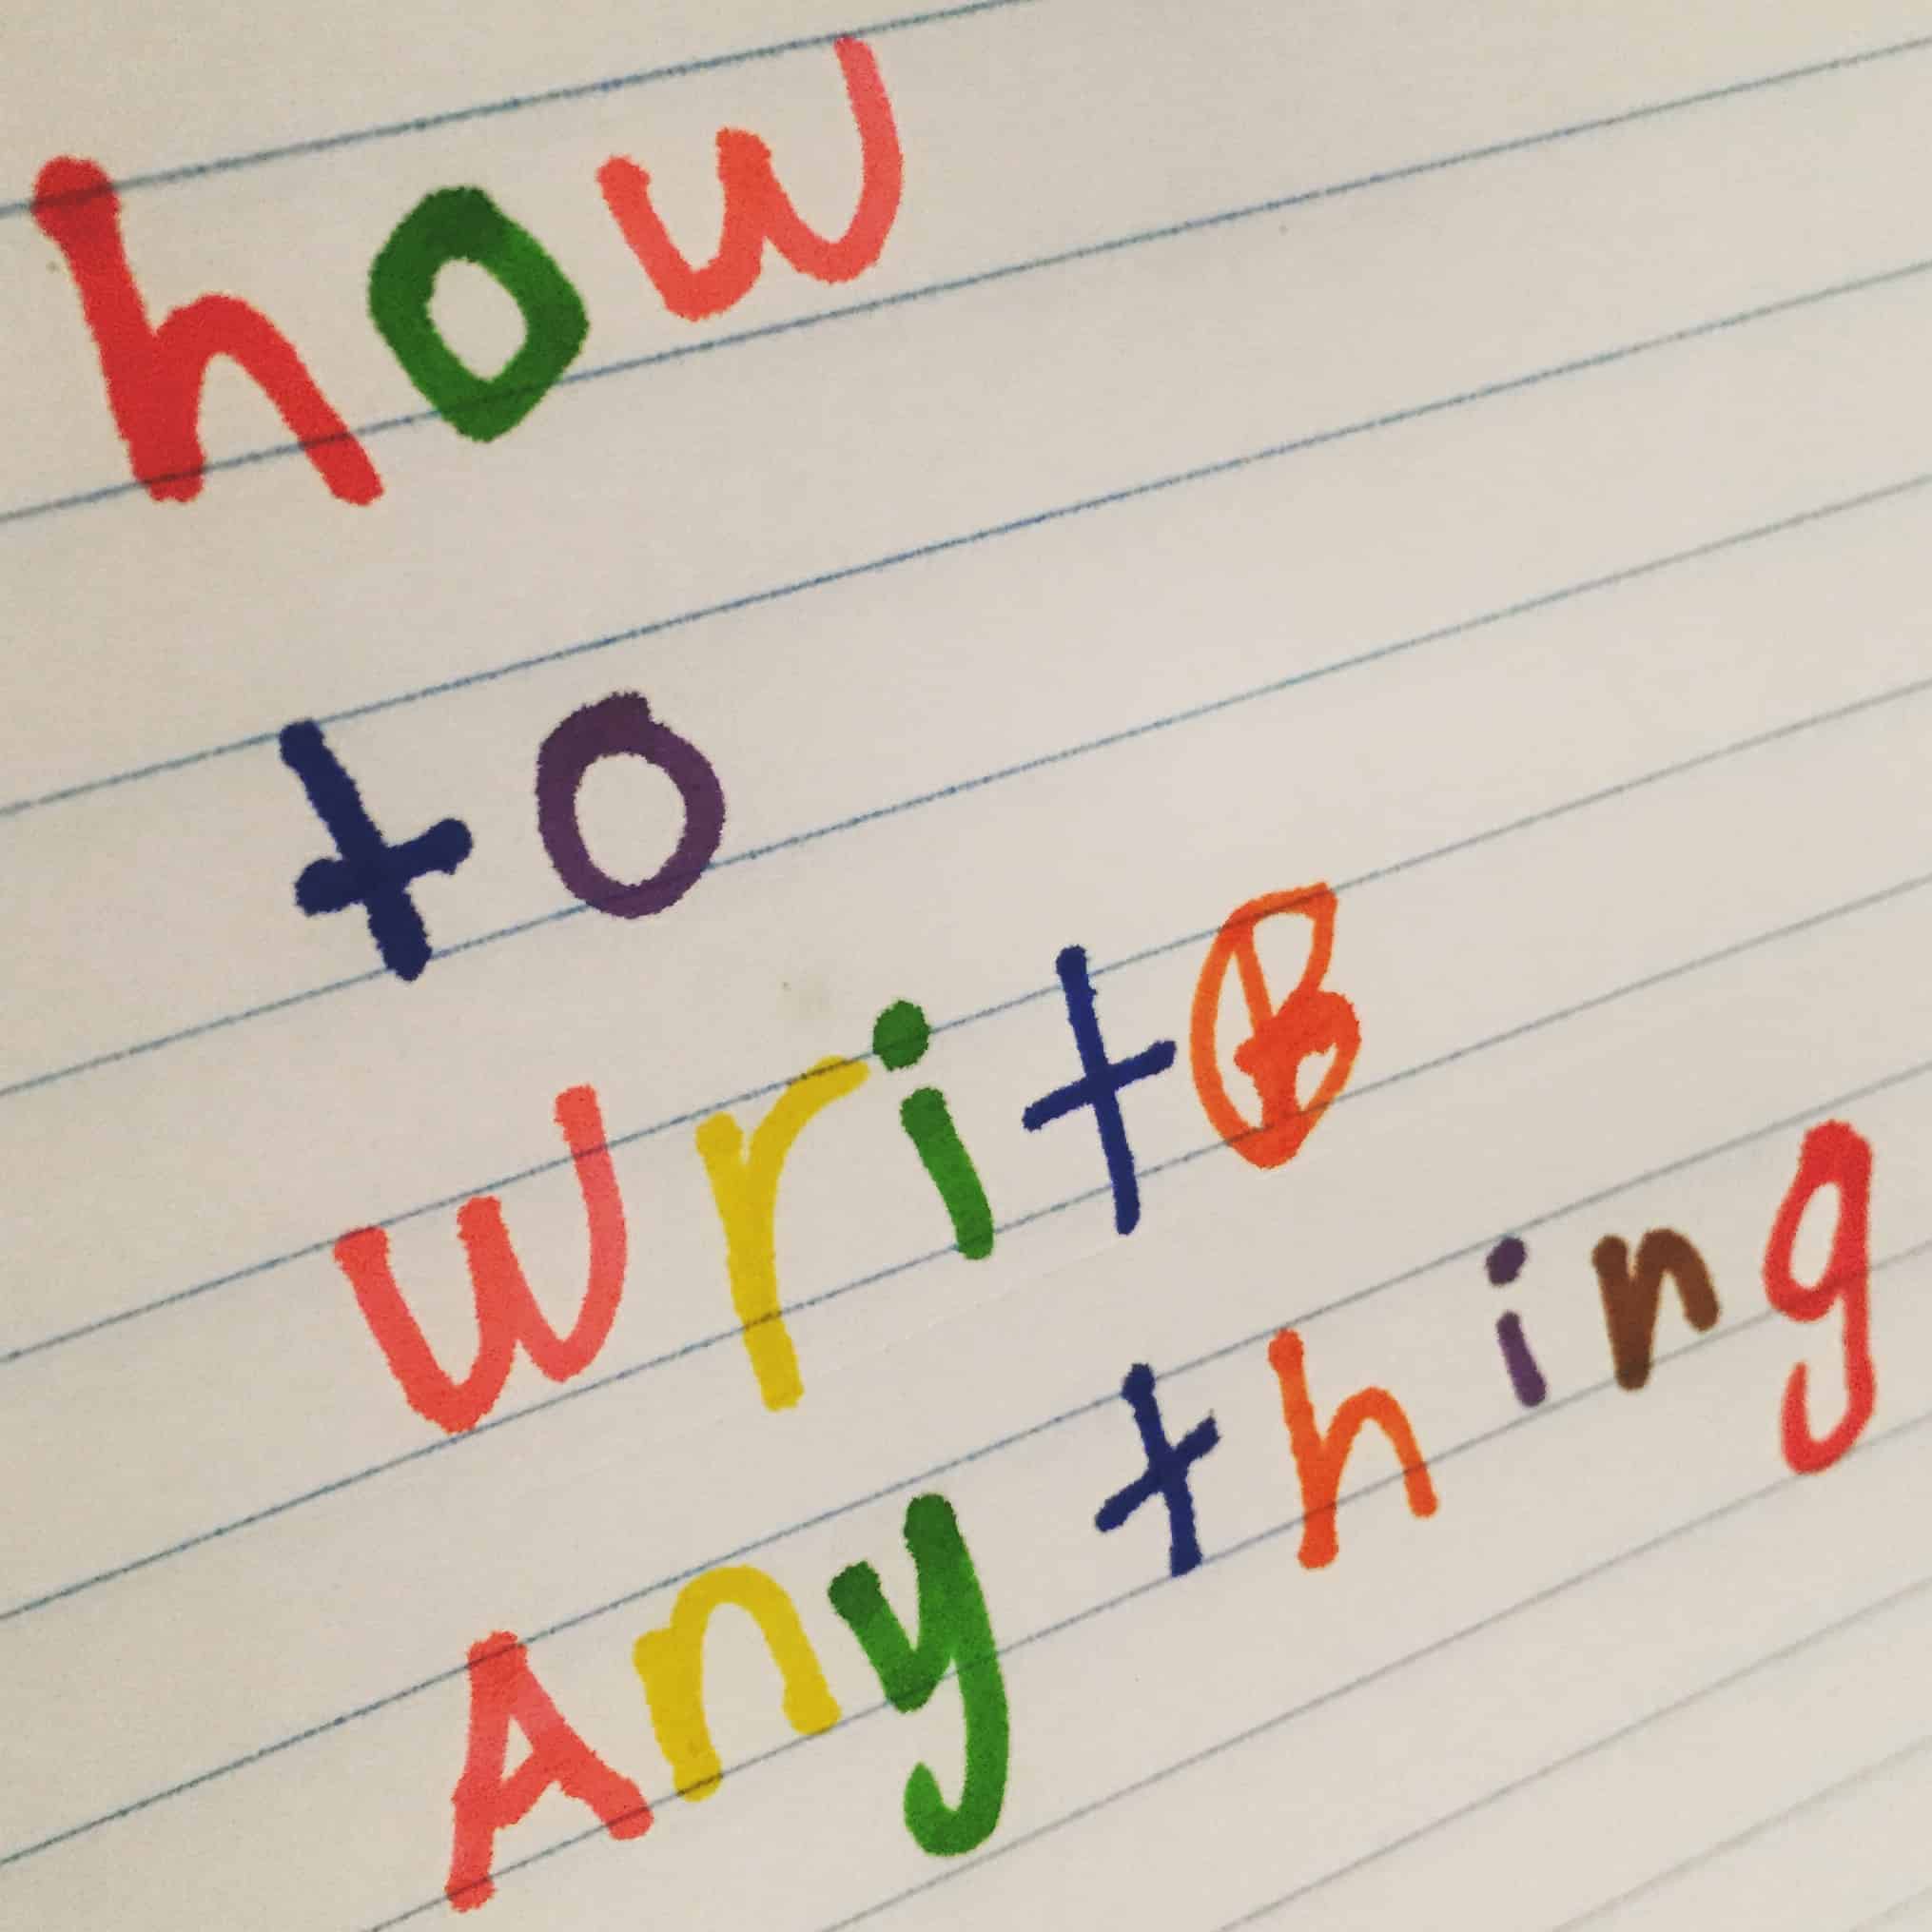 How to write anything